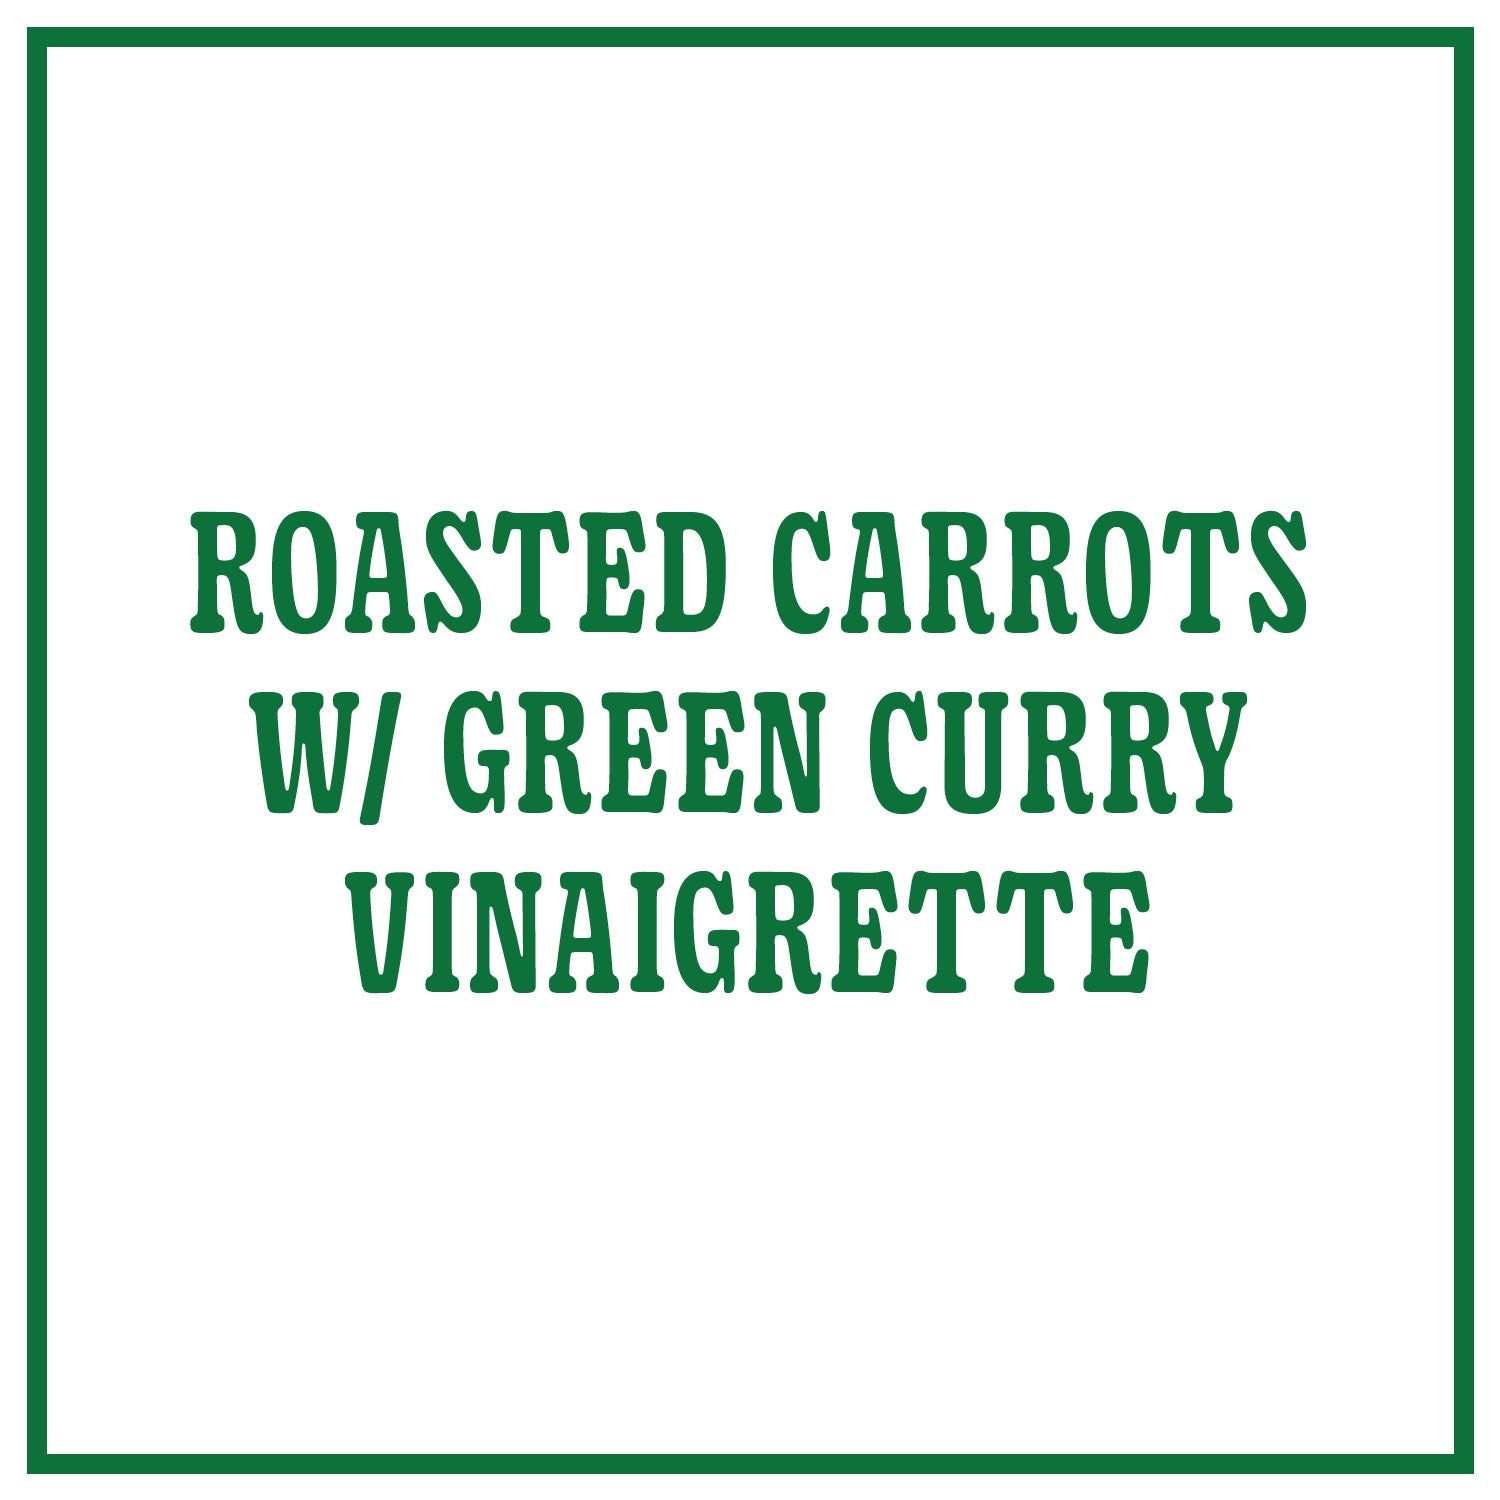 Roasted Carrots with Green Curry Vinaigrette